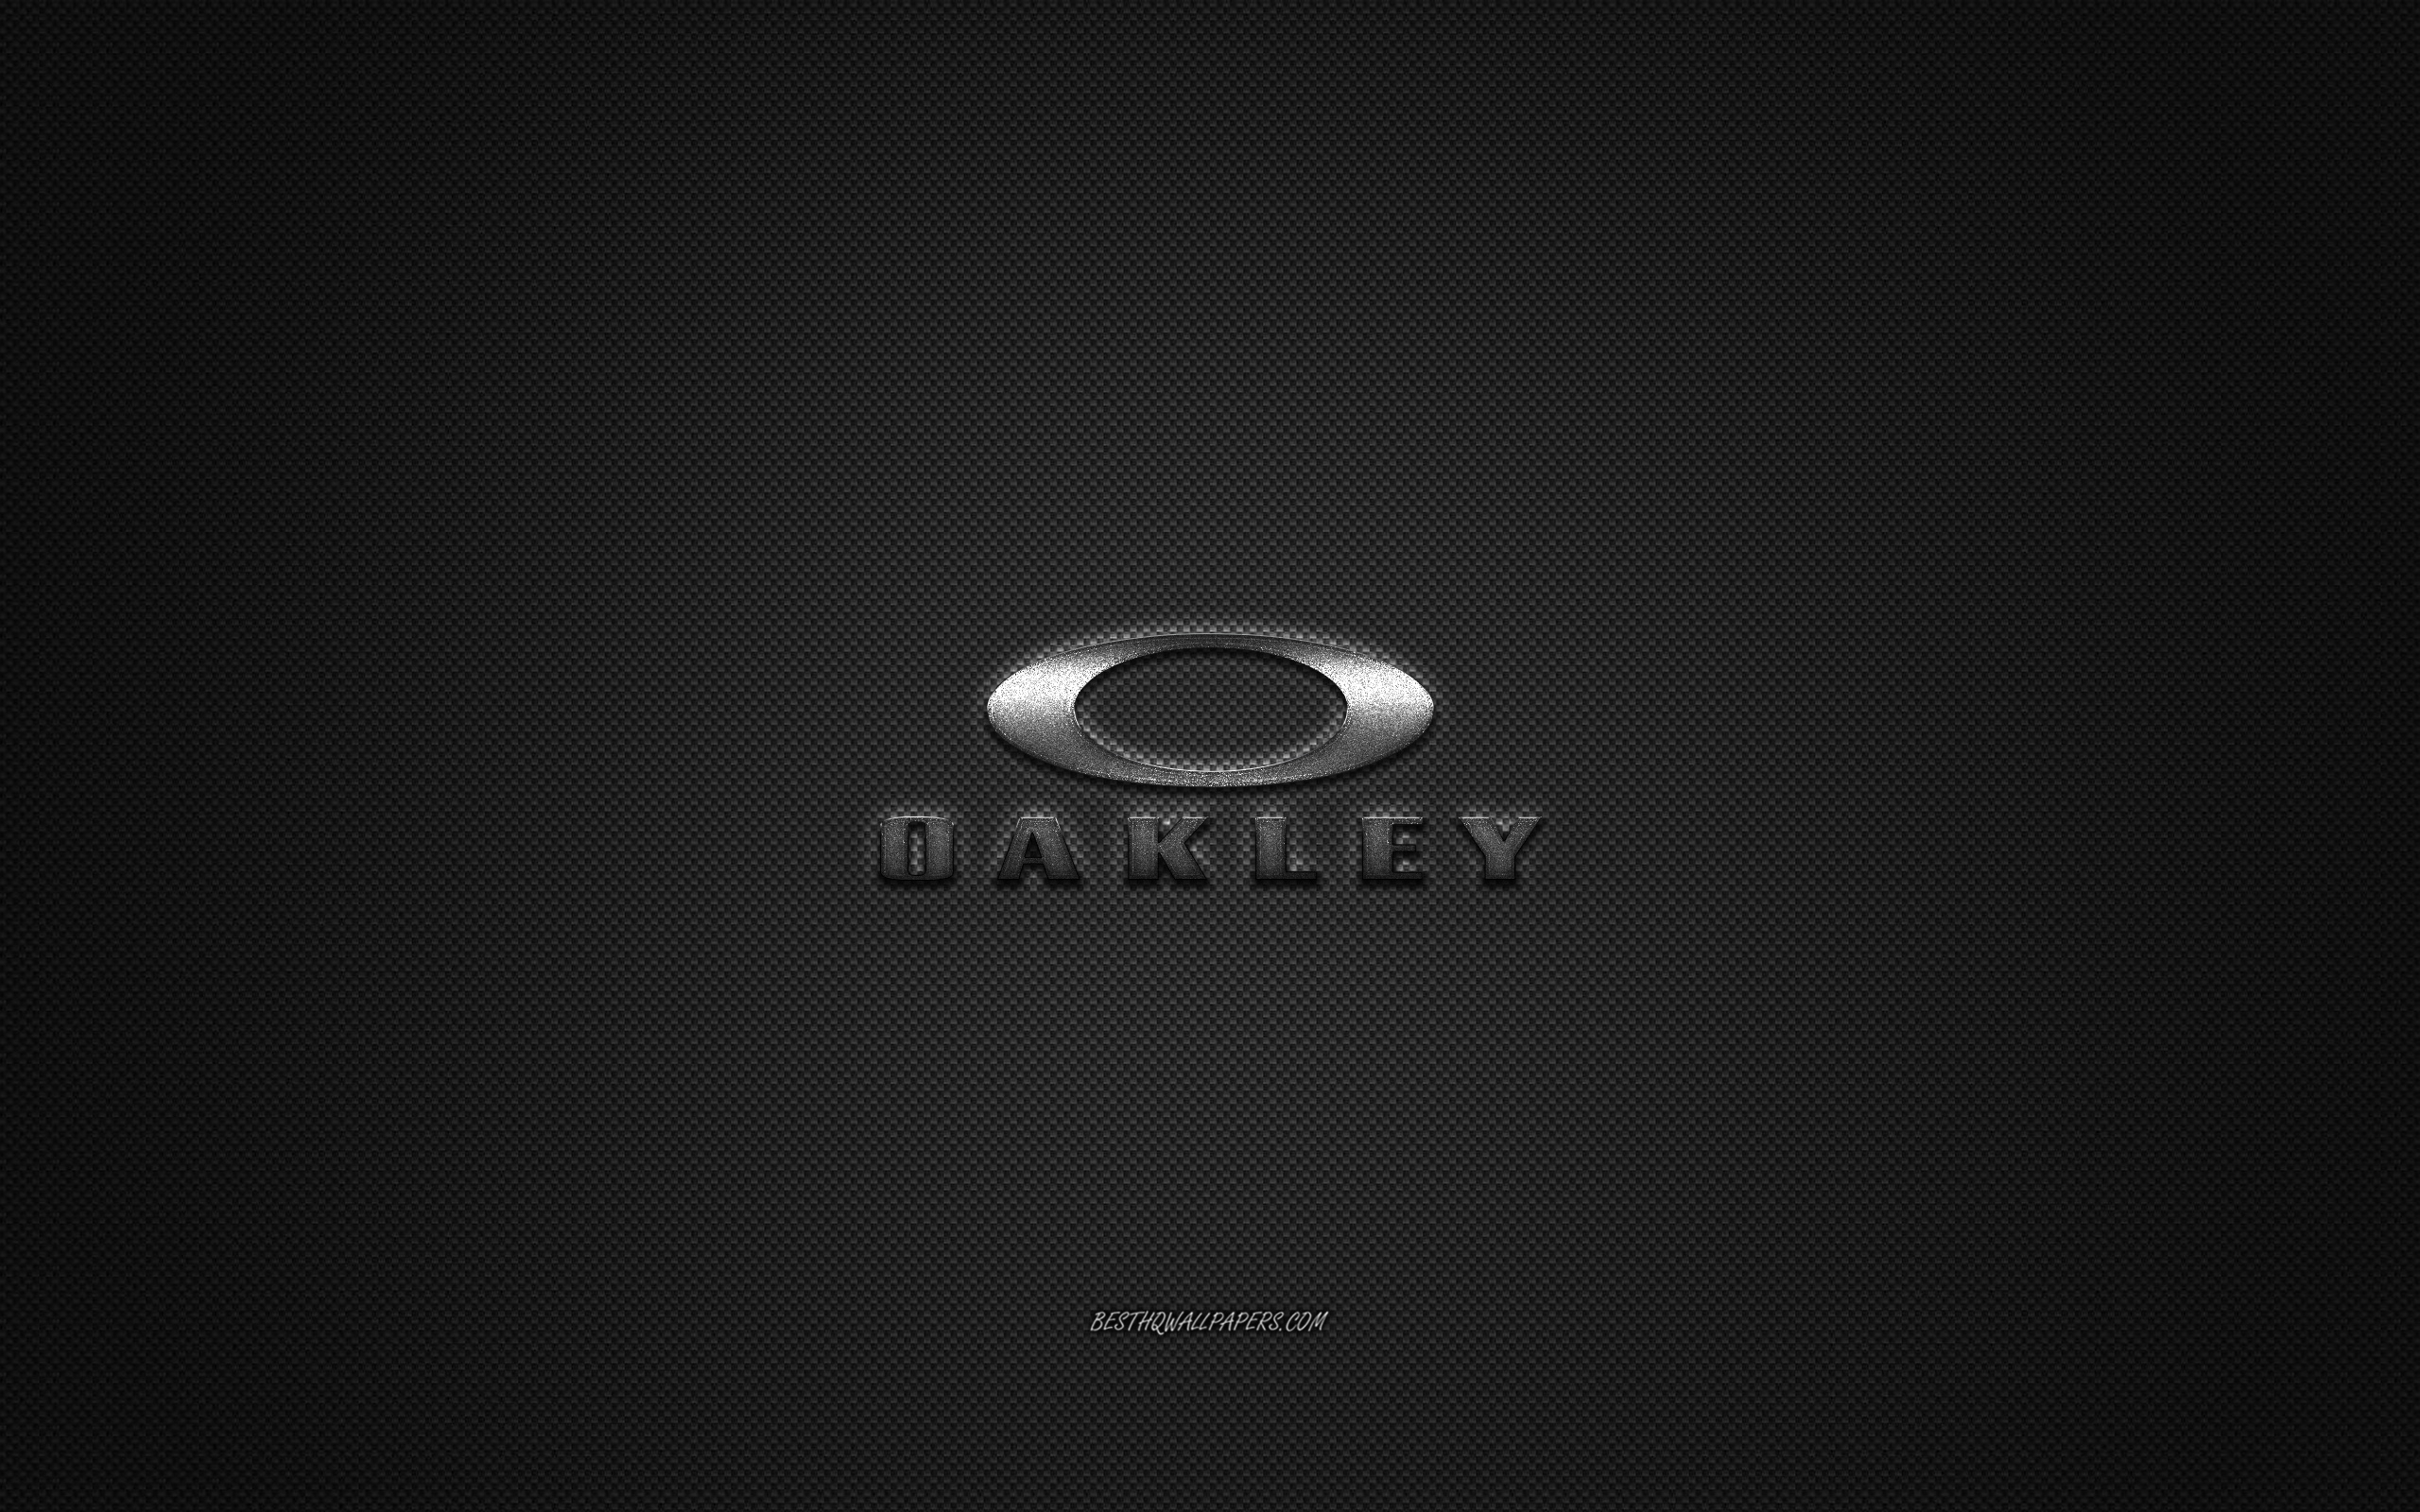 Download Wallpapers Oakley Logo Metal Emblem Apparel Brand Black Carbon Texture Global Apparel Brands Oakley Fashion Concept Oakley Emblem For Desktop With Resolution 2560x1600 High Quality Hd Pictures Wallpapers